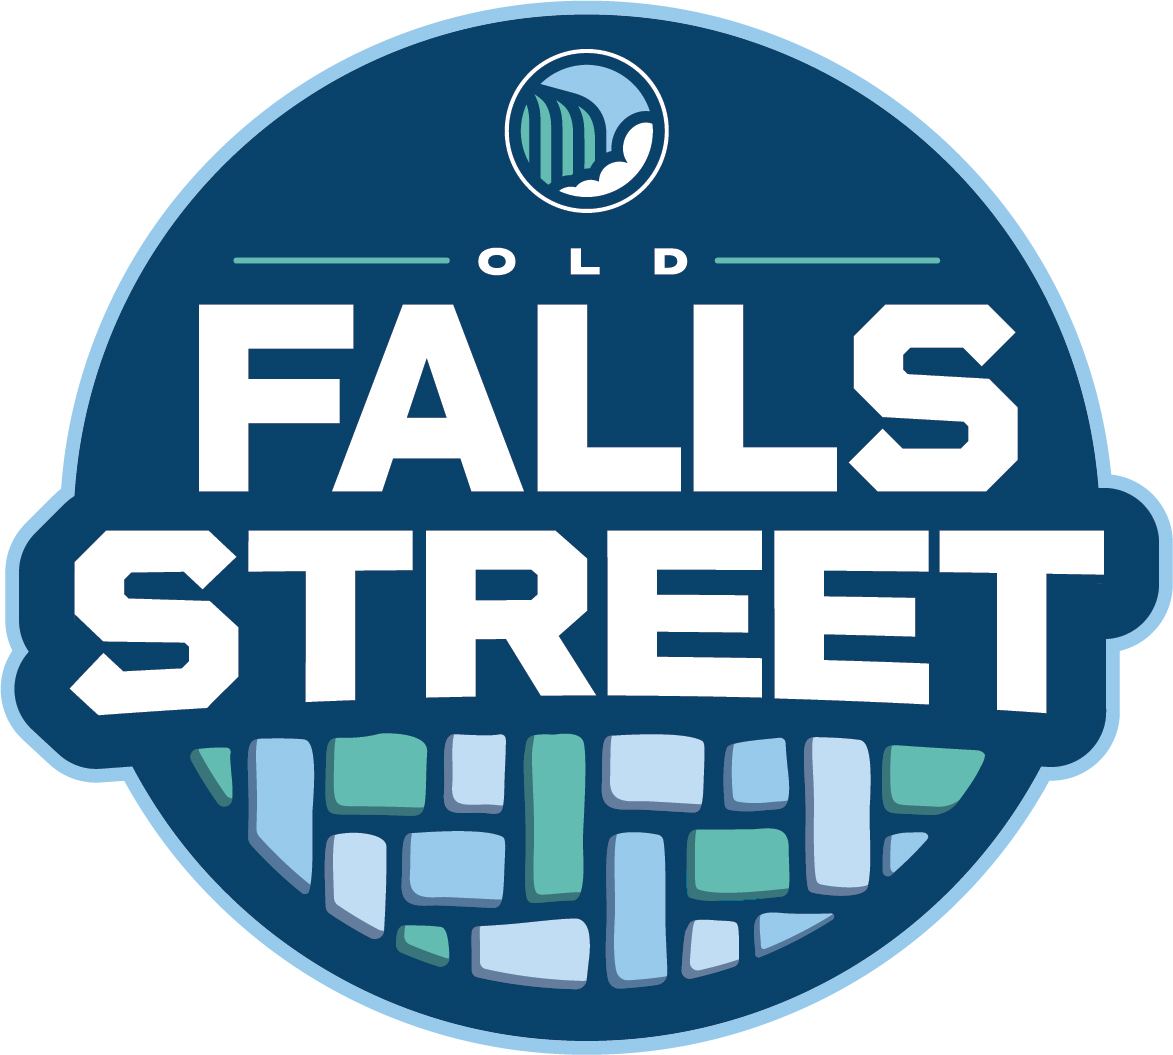 Destination Niagara USA has unveiled a new logo for Old Falls Street. (Submitted)